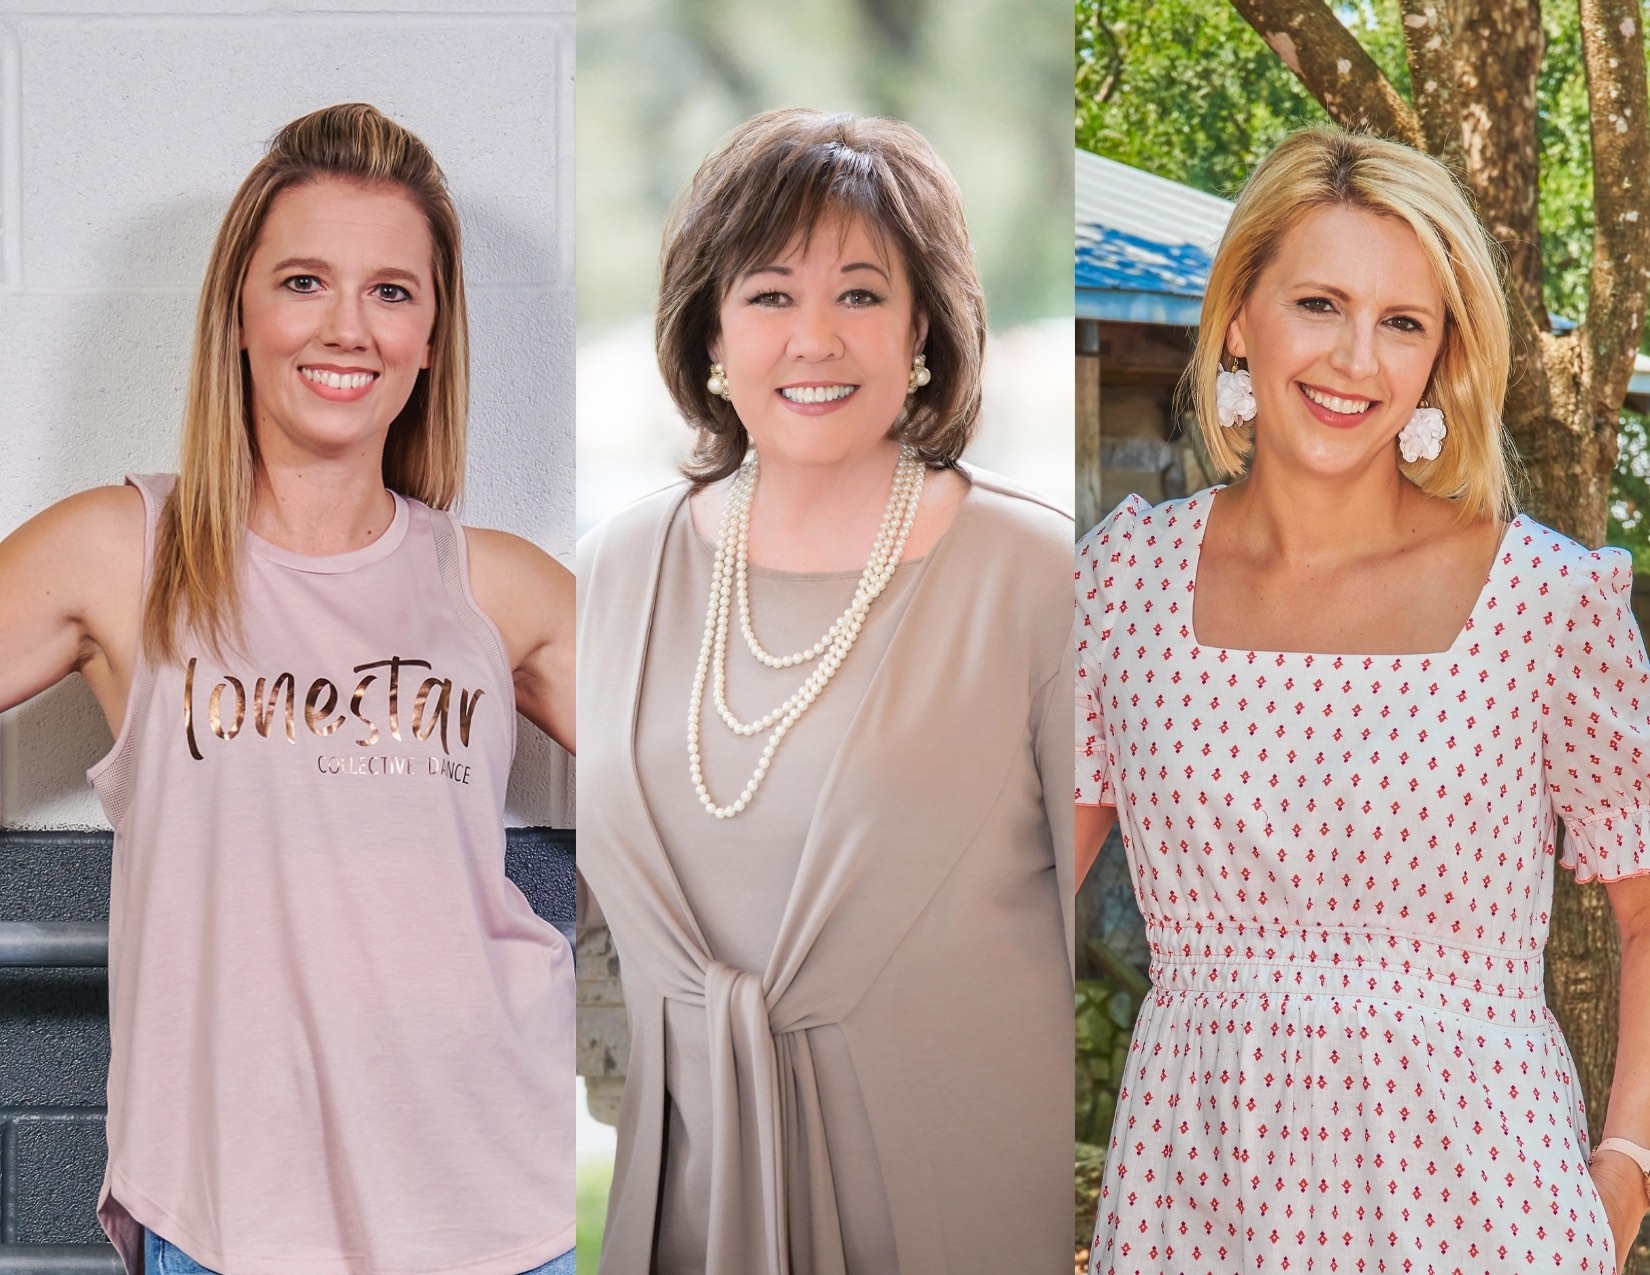 HILL COUNTRY WOMAN: The Secret to Boerne’s Success in Challenging Times